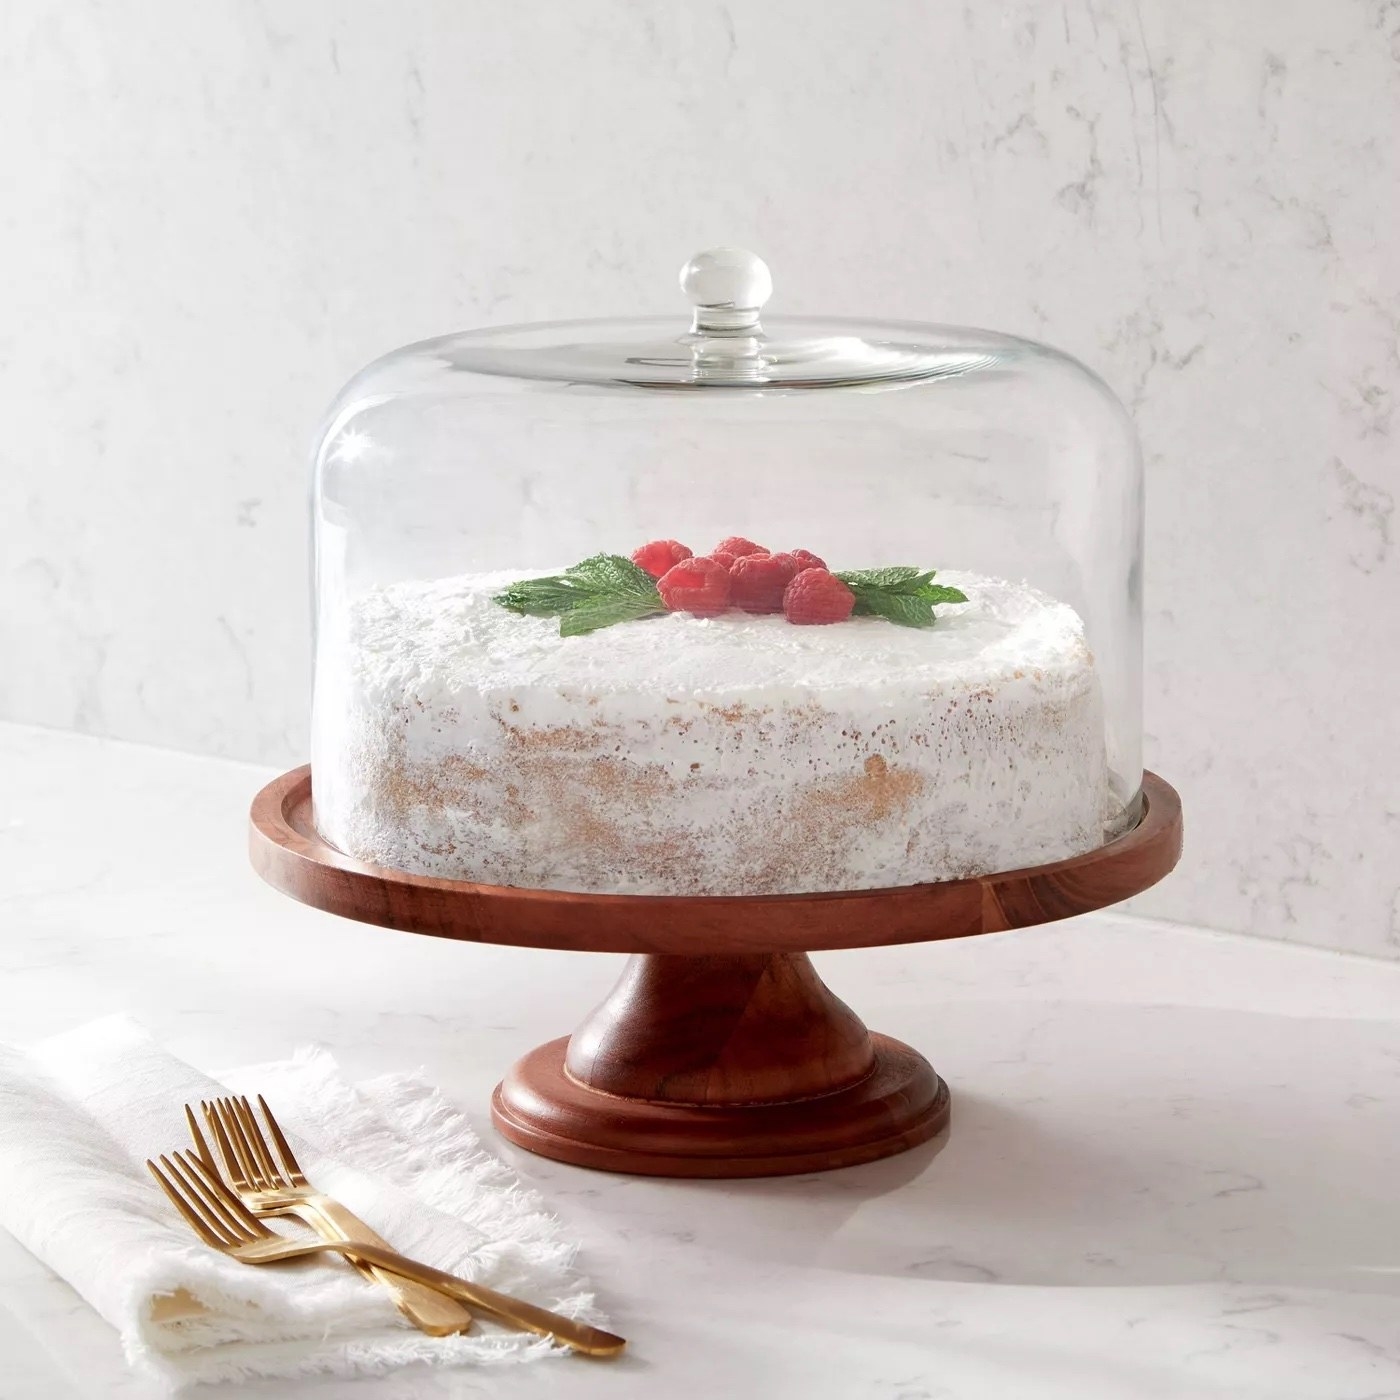 the cake stand with a white cake